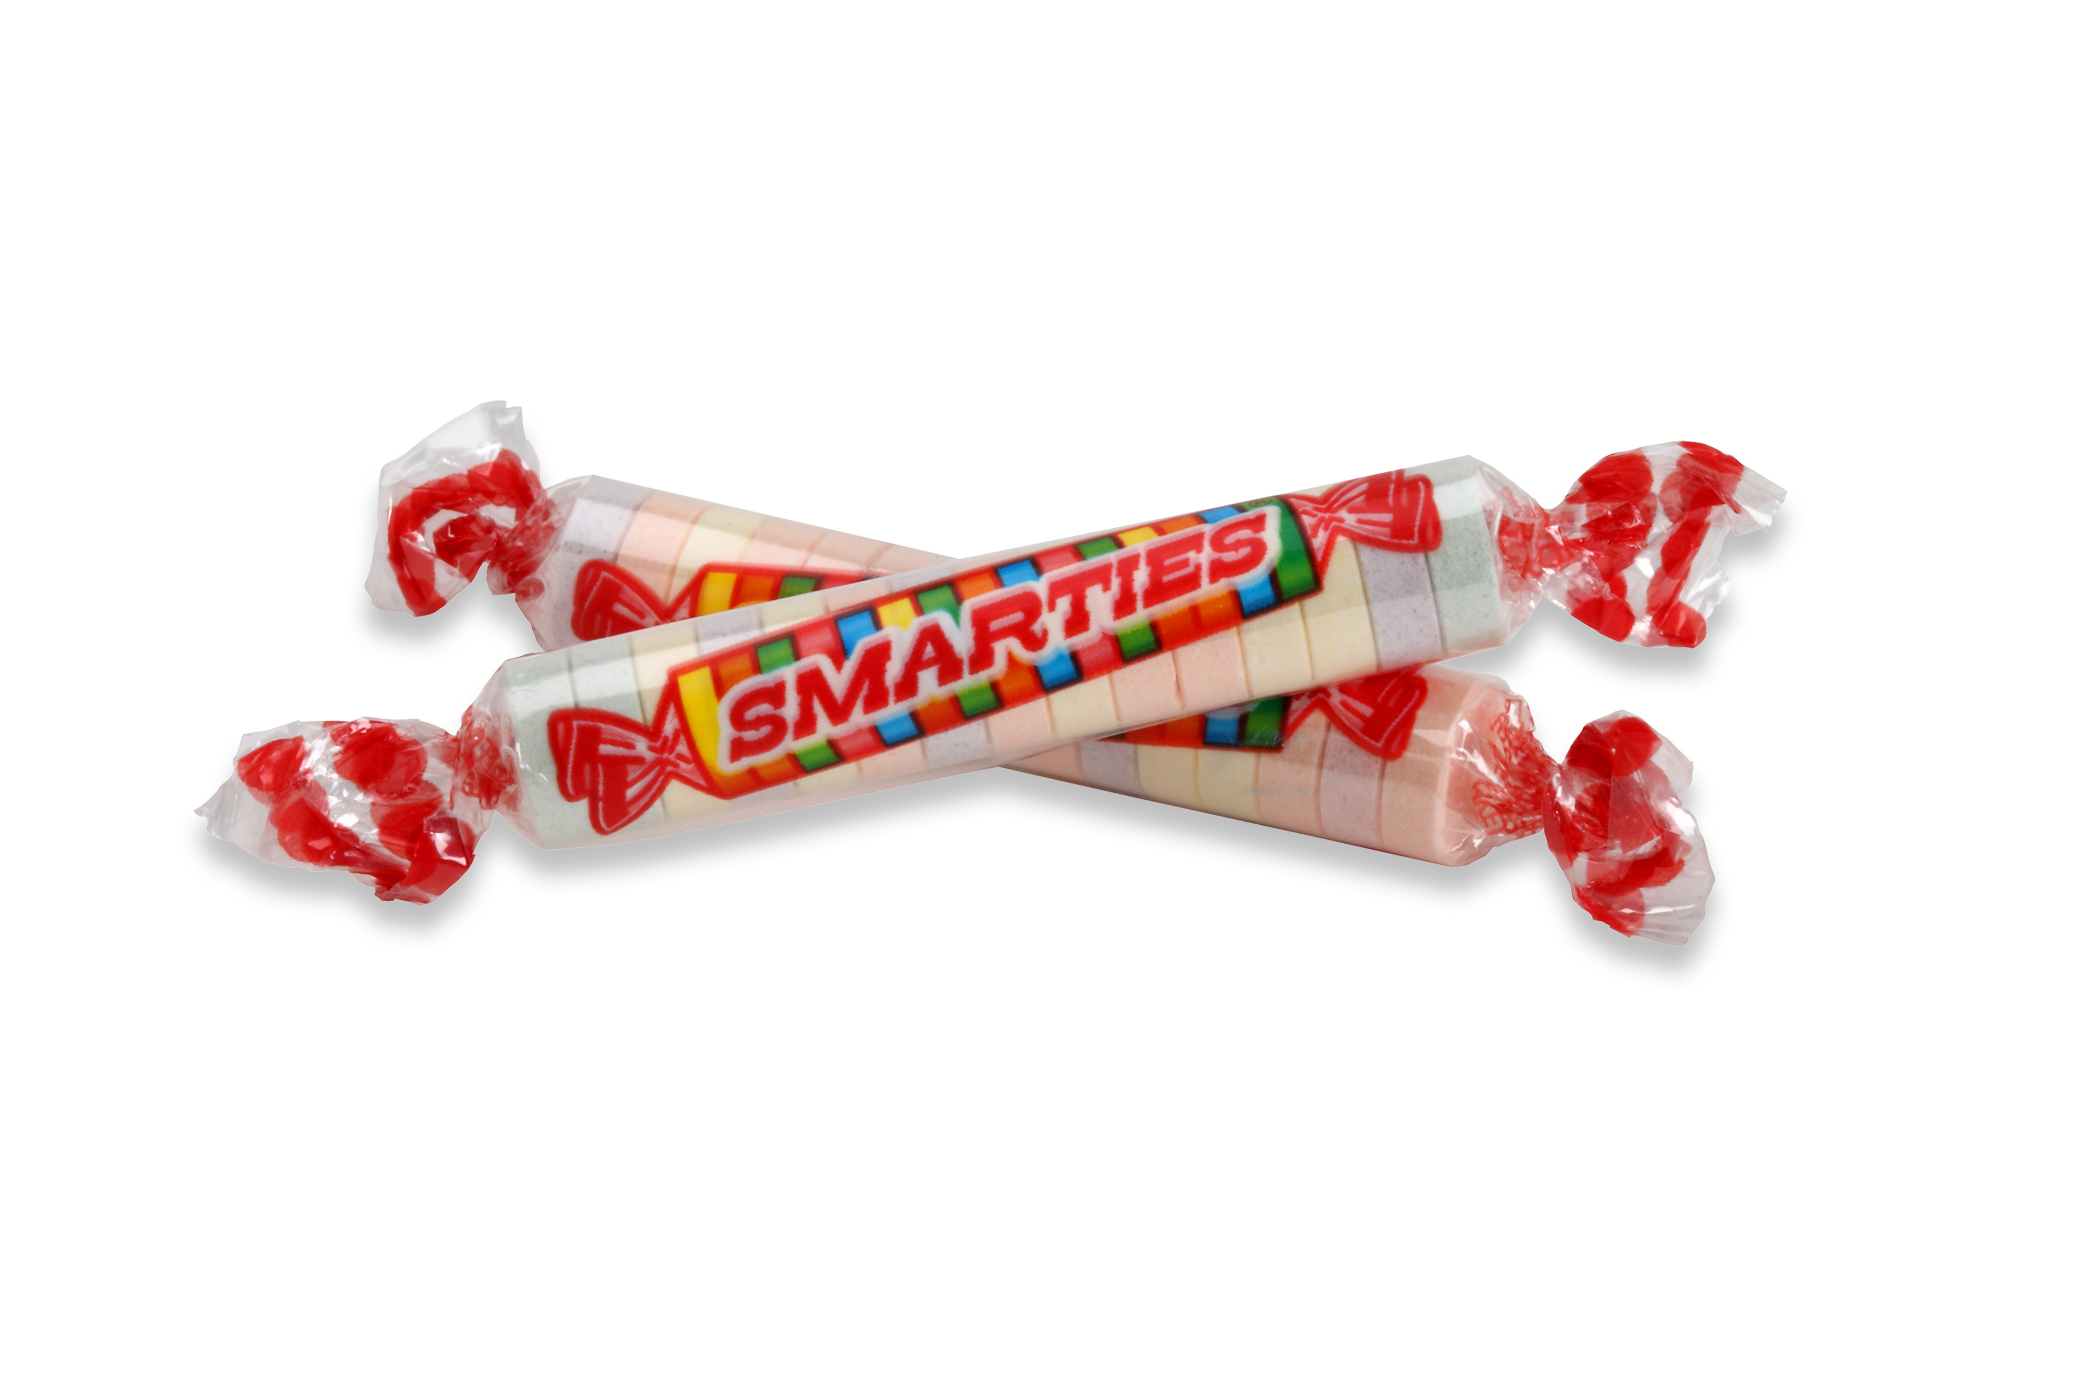 clipart candy smartie